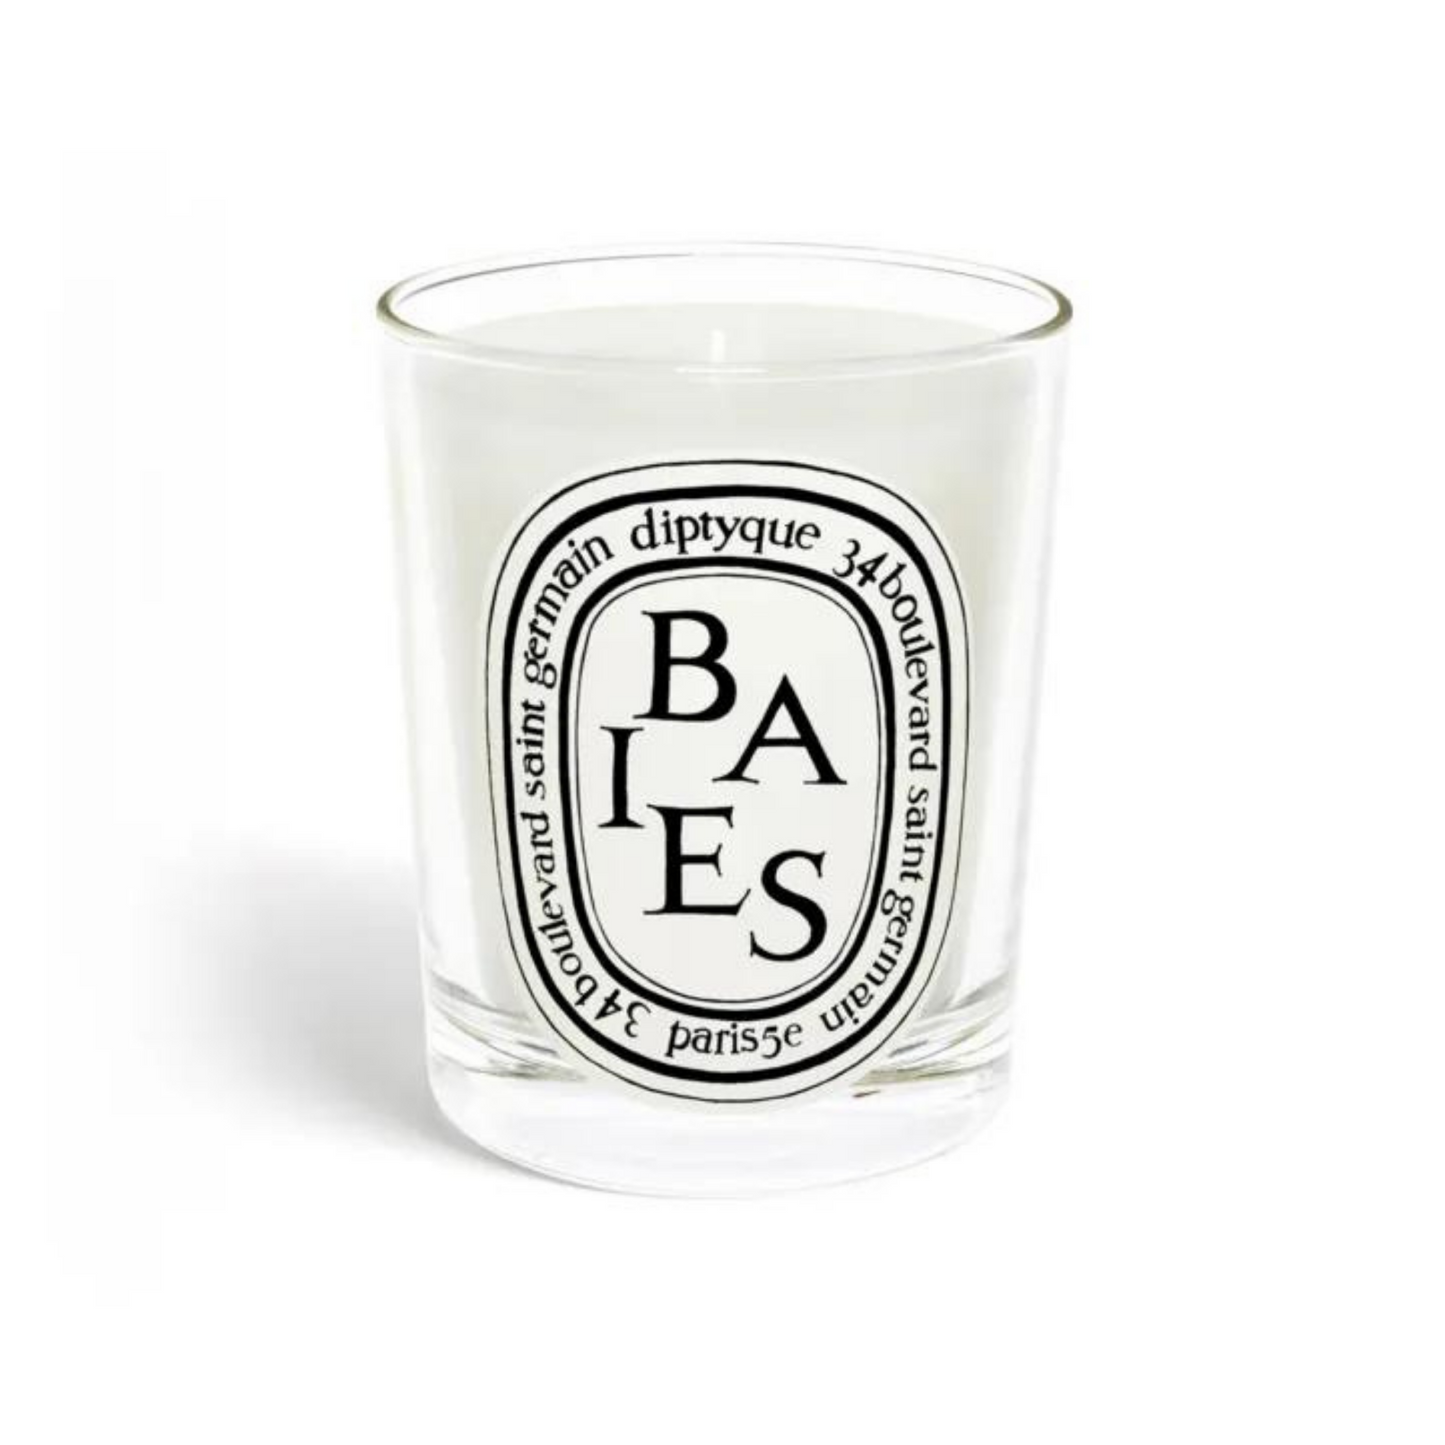 Primary image of Baies (Berries) Candle